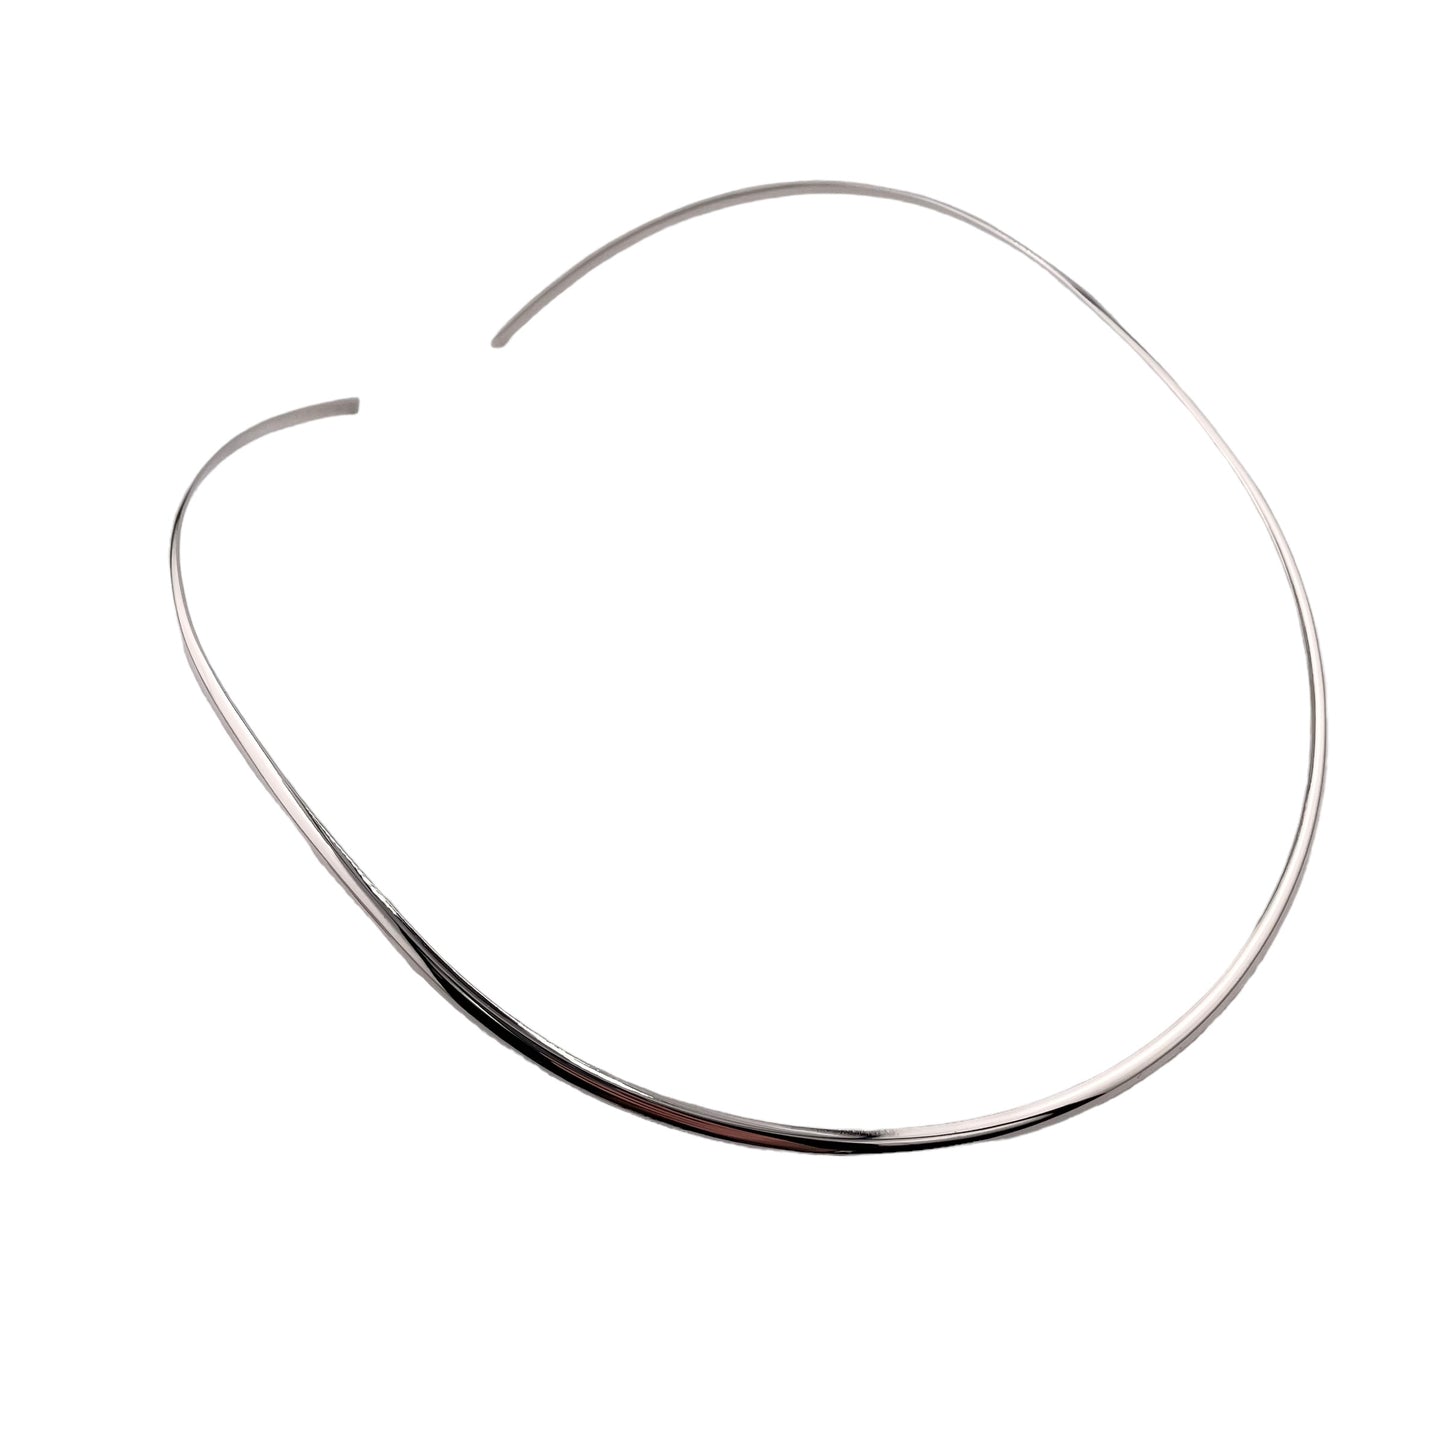 Half Round 3mm Collar Choker Necklace 17" Sterling Silver